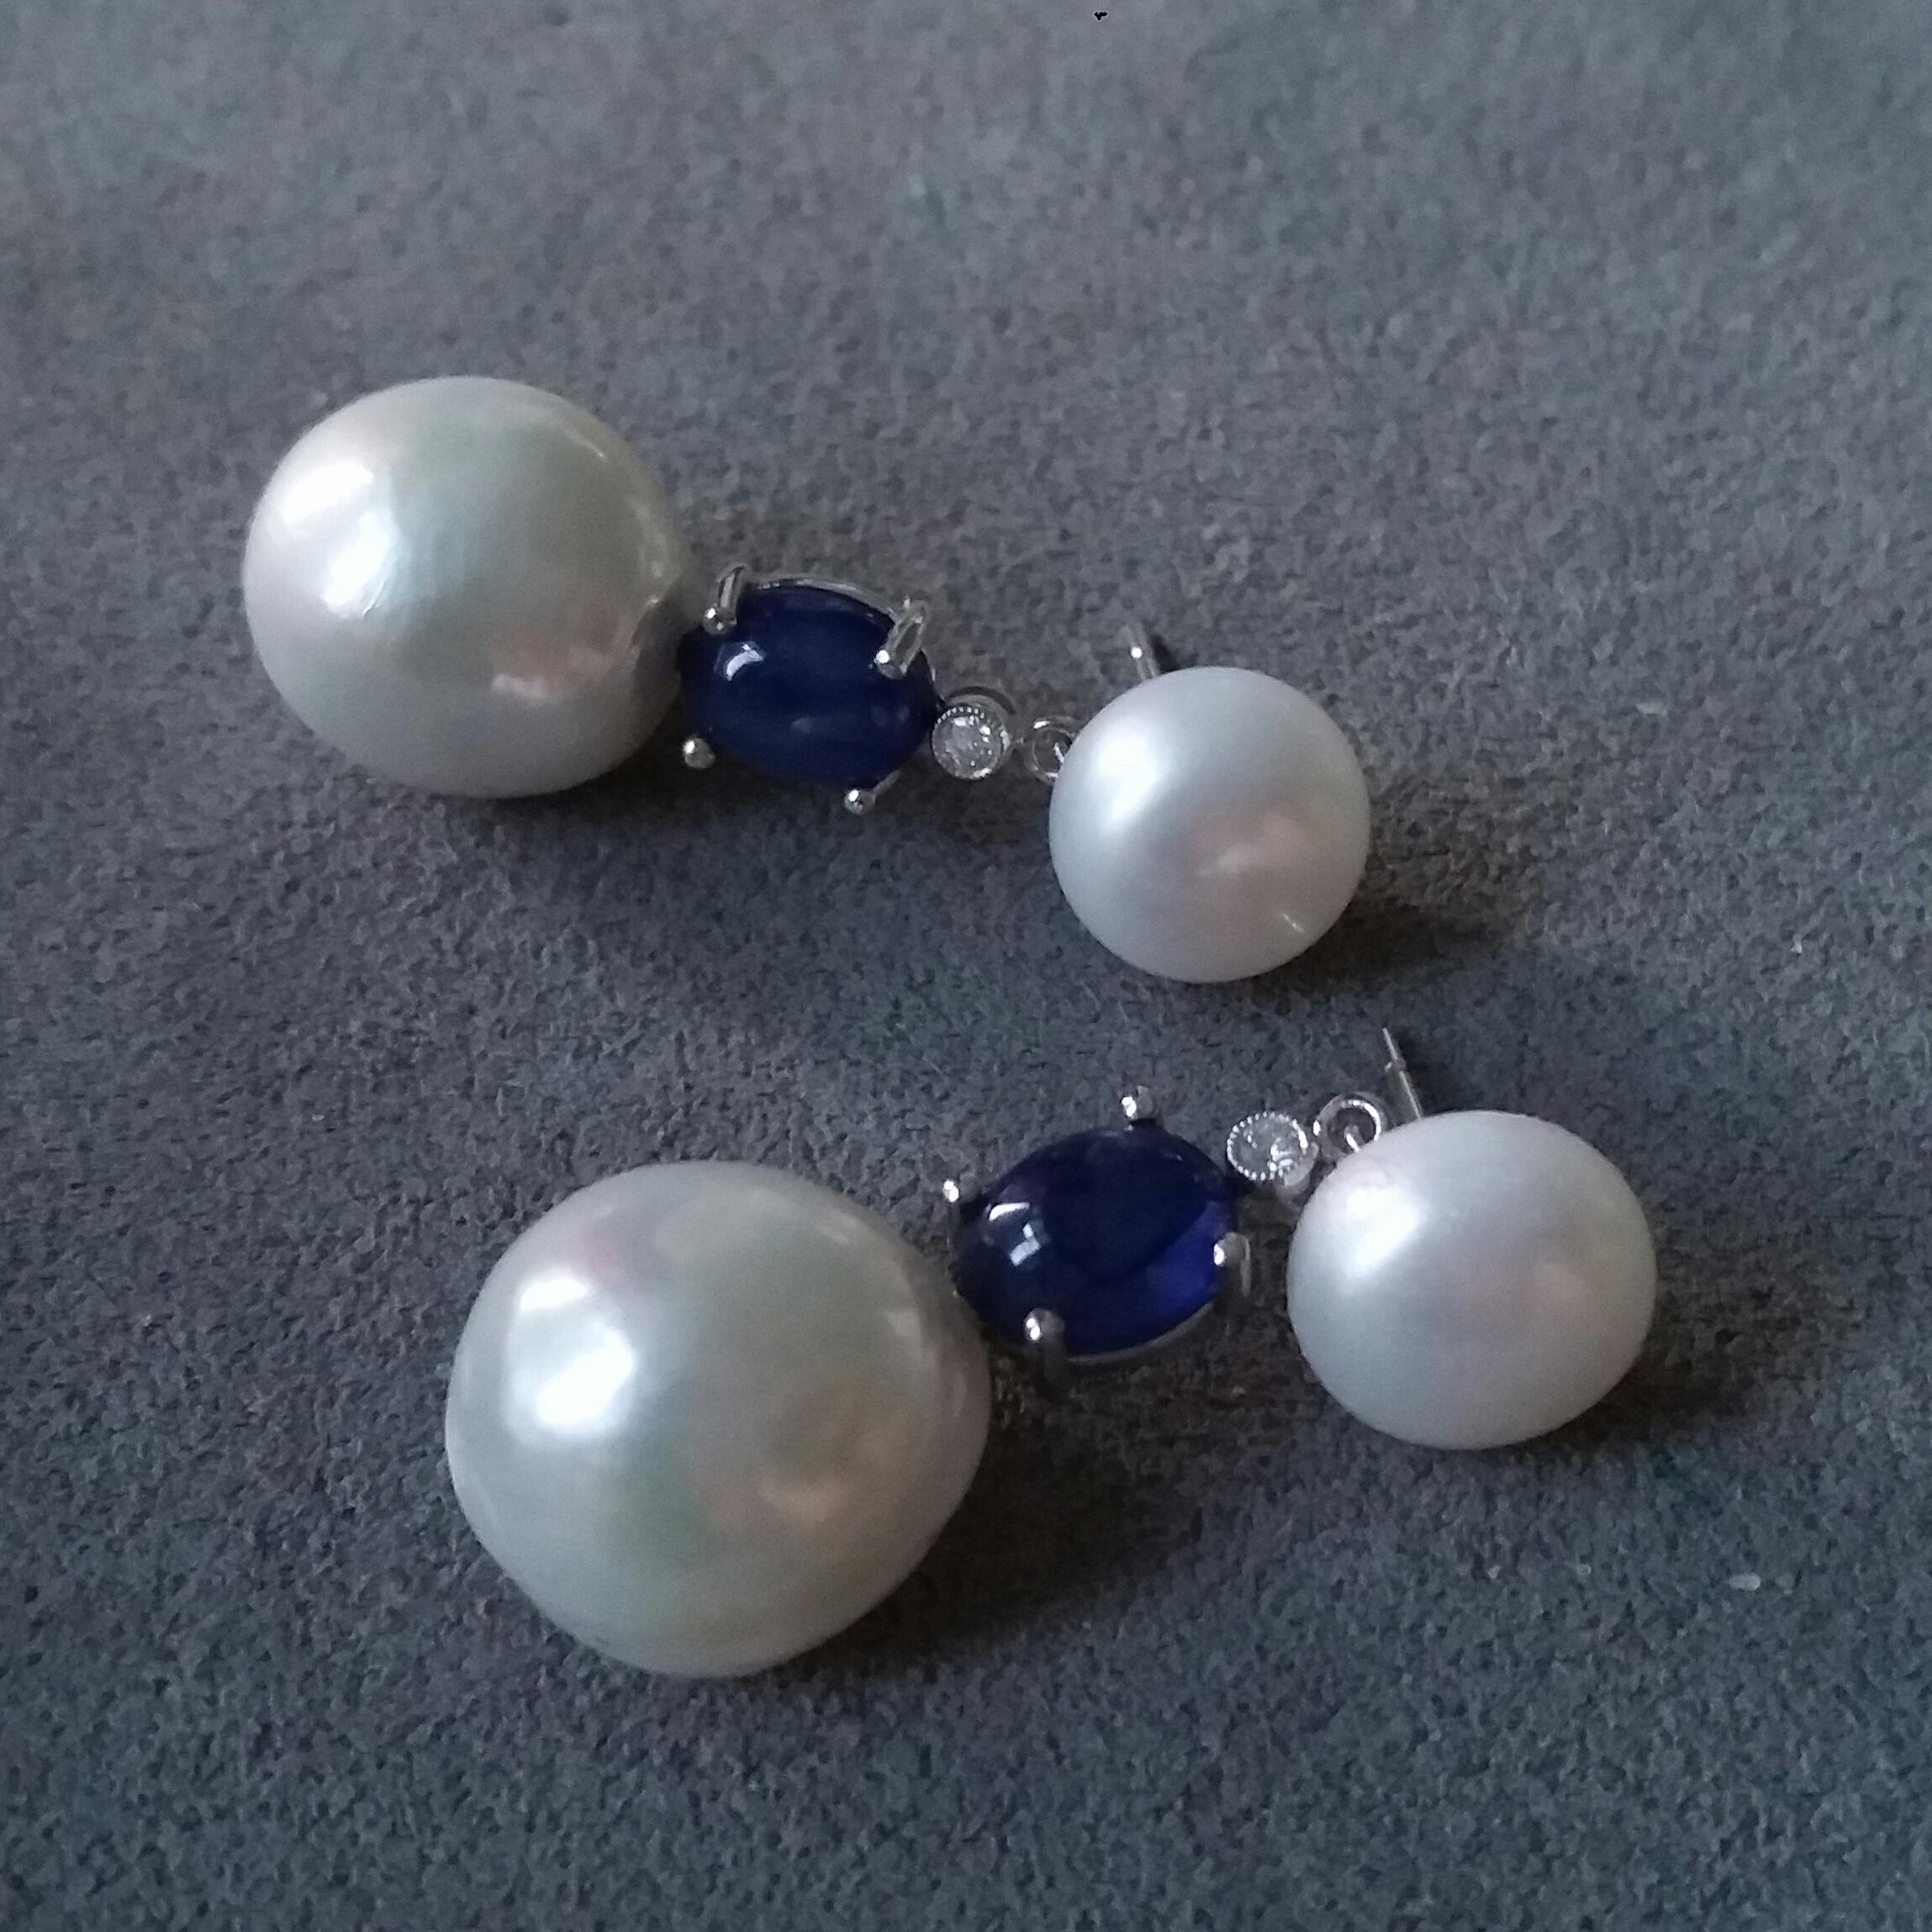 2 button 10 mm in diameter round shape pearls in the top,middle parts with 2 small full cut diamonds and 2 oval blue sapphires cabochons ,lower parts with 2 baroque pearls of about 13 mm in diameter
Dimensions
Top Pearls 10 mm
Bottom Baroque Pearls 